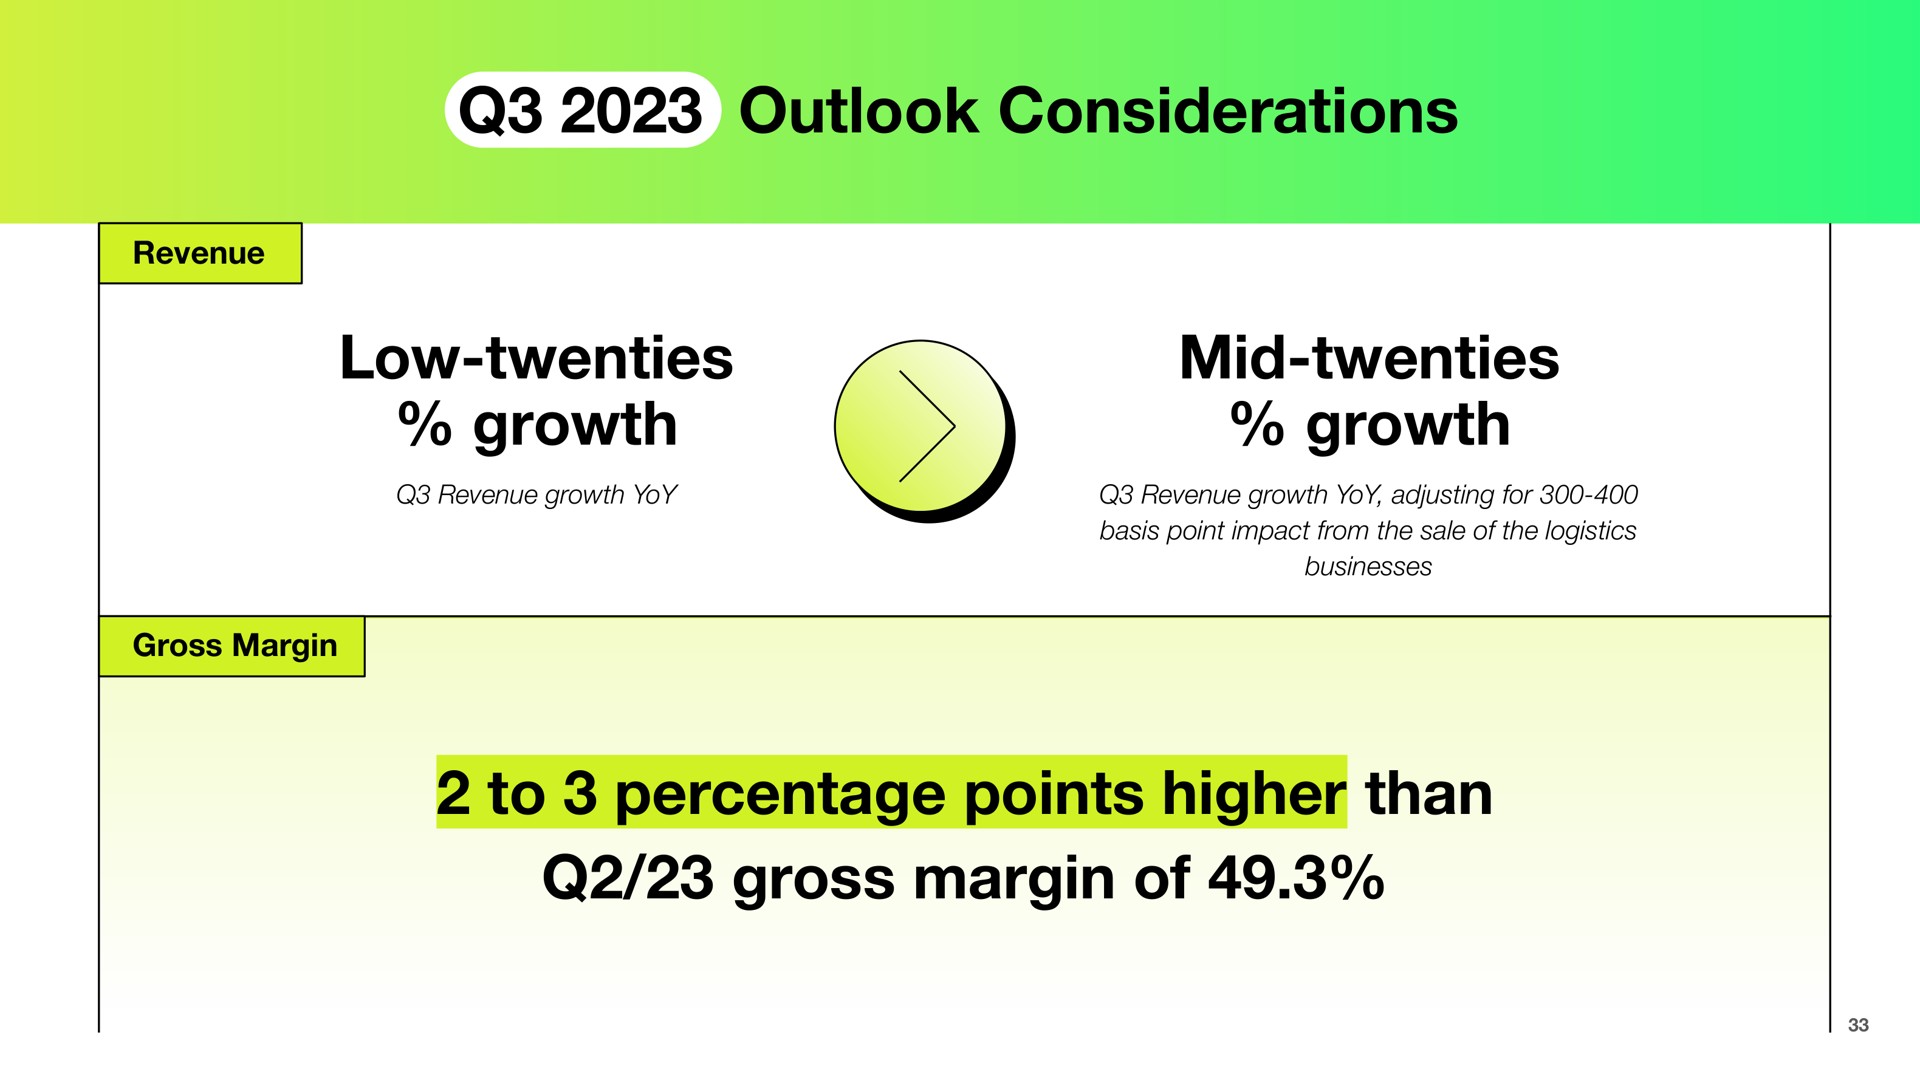 outlook considerations low twenties growth mid twenties growth to percentage points higher than gross margin of | Shopify